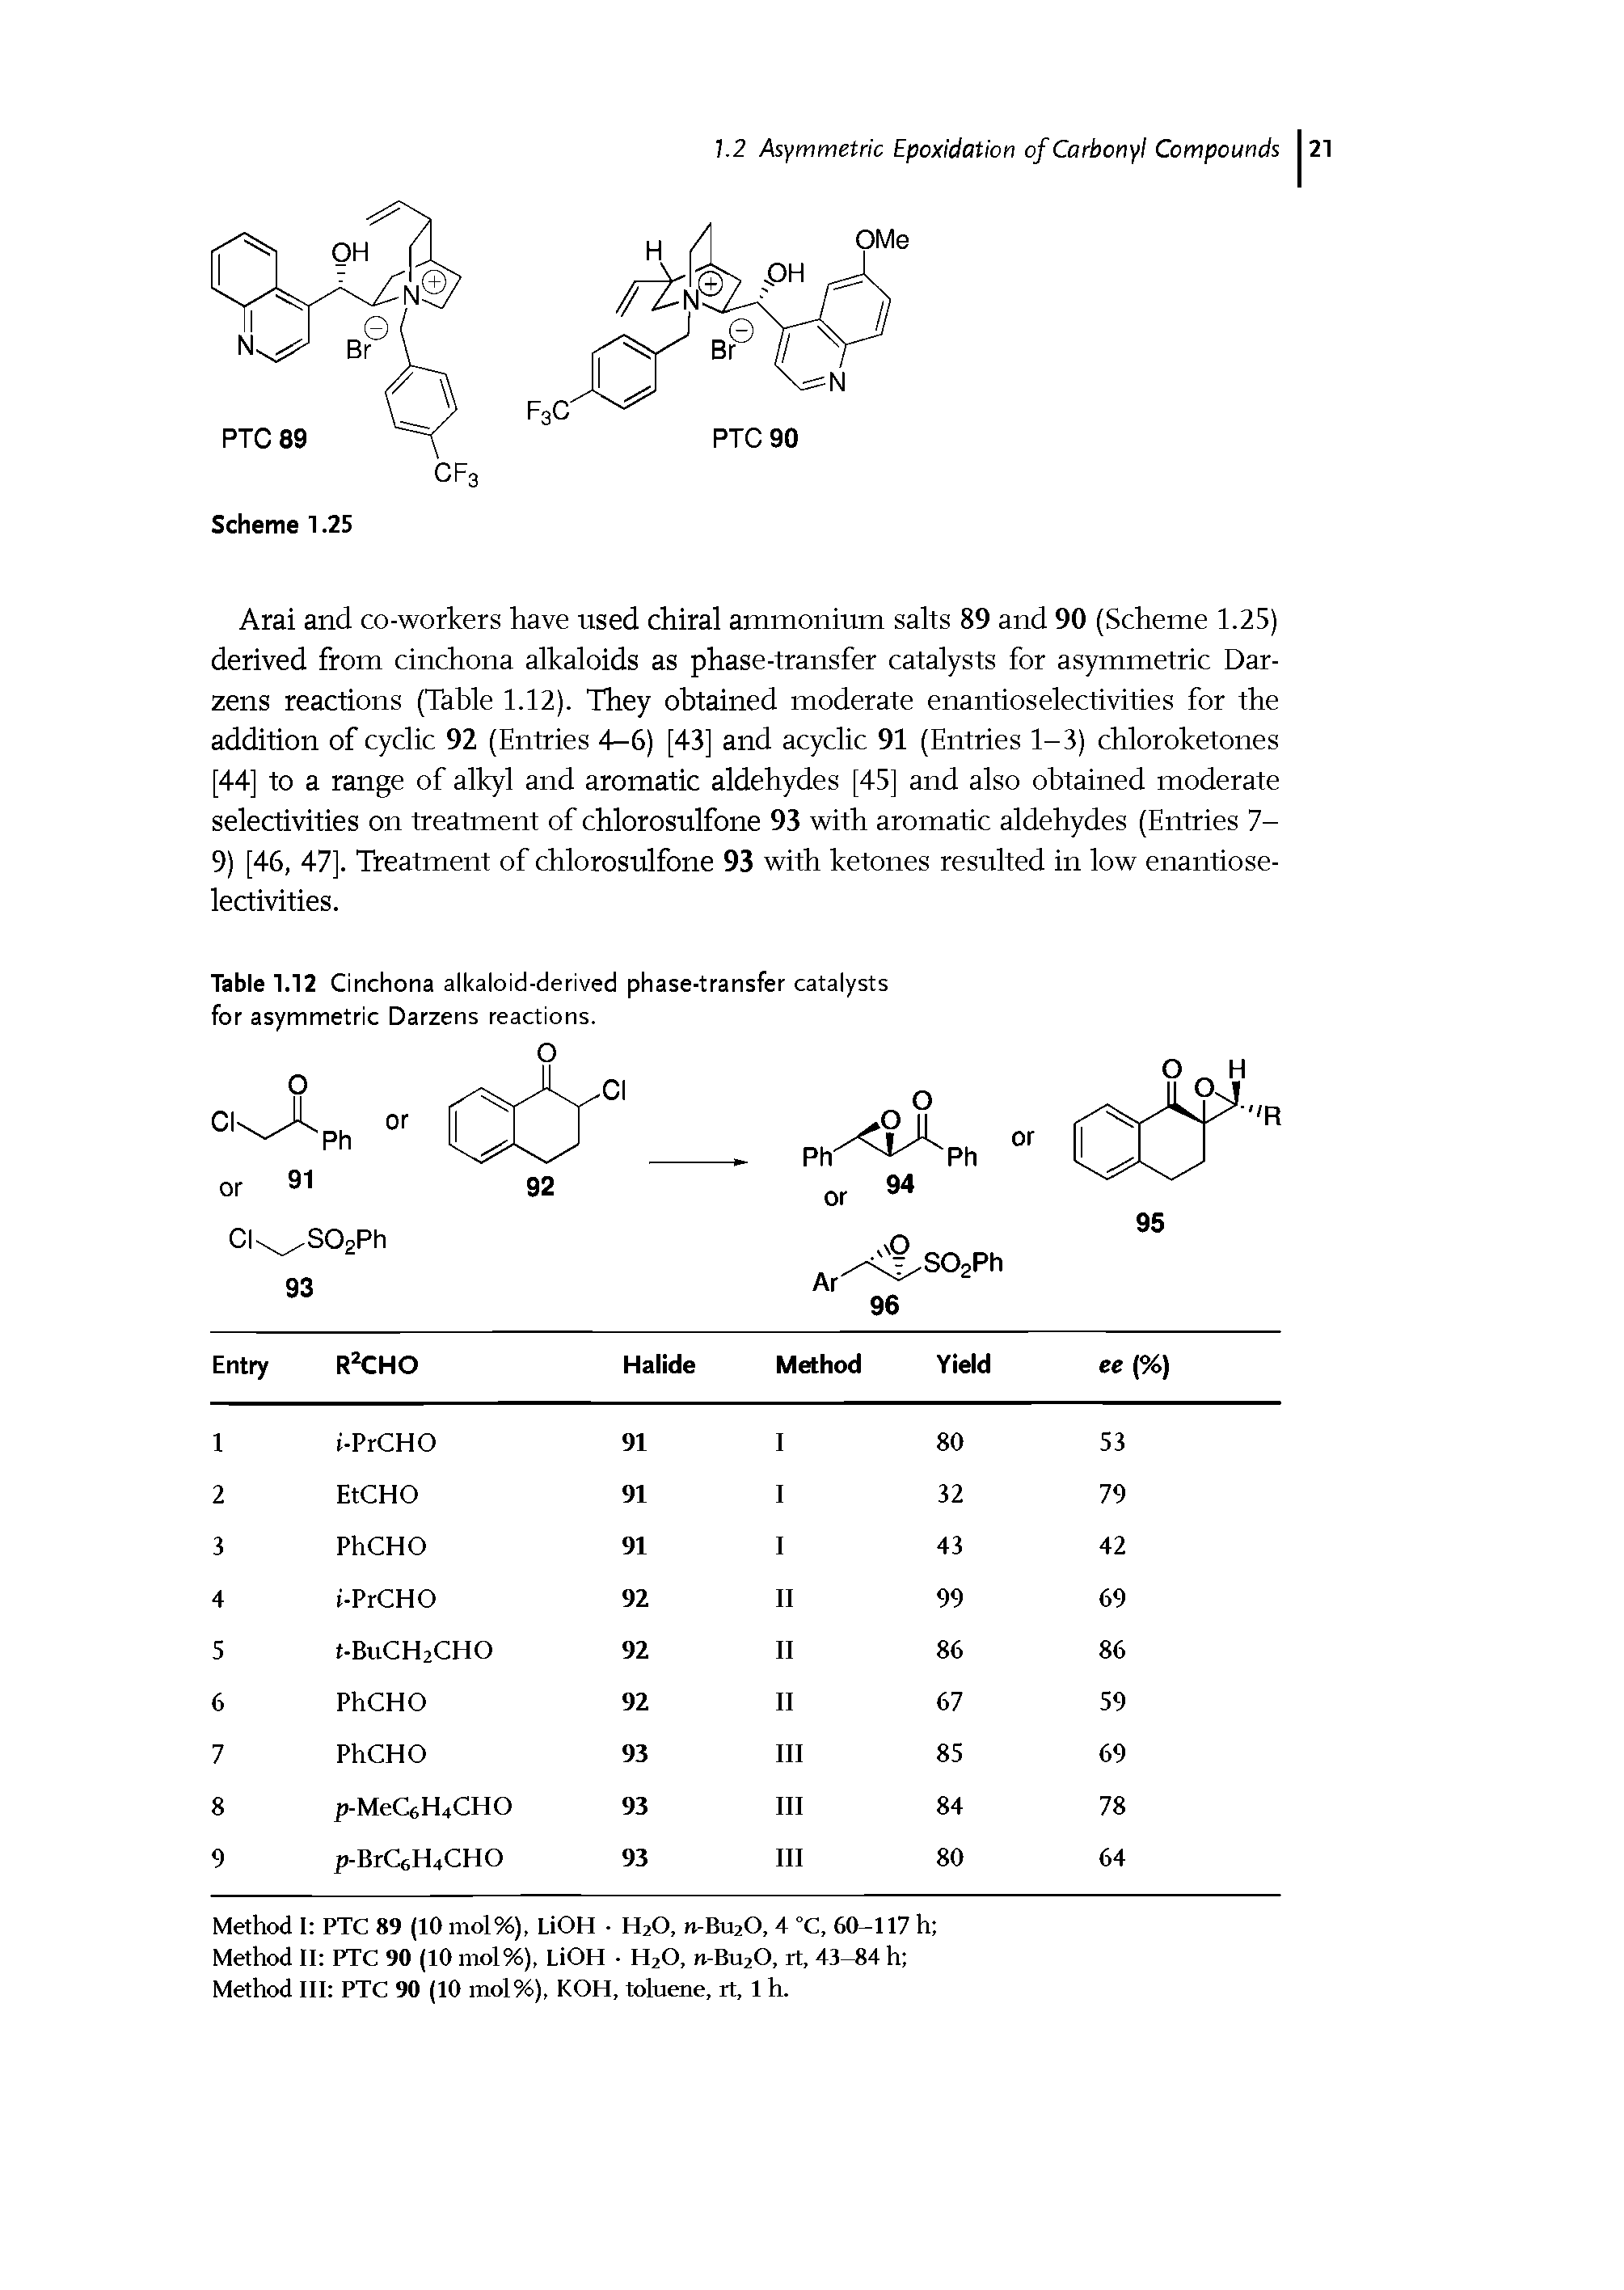 Table 1.12 Cinchona alkaloid-derived phase-transfer catalysts for asymmetric Darzens reactions.